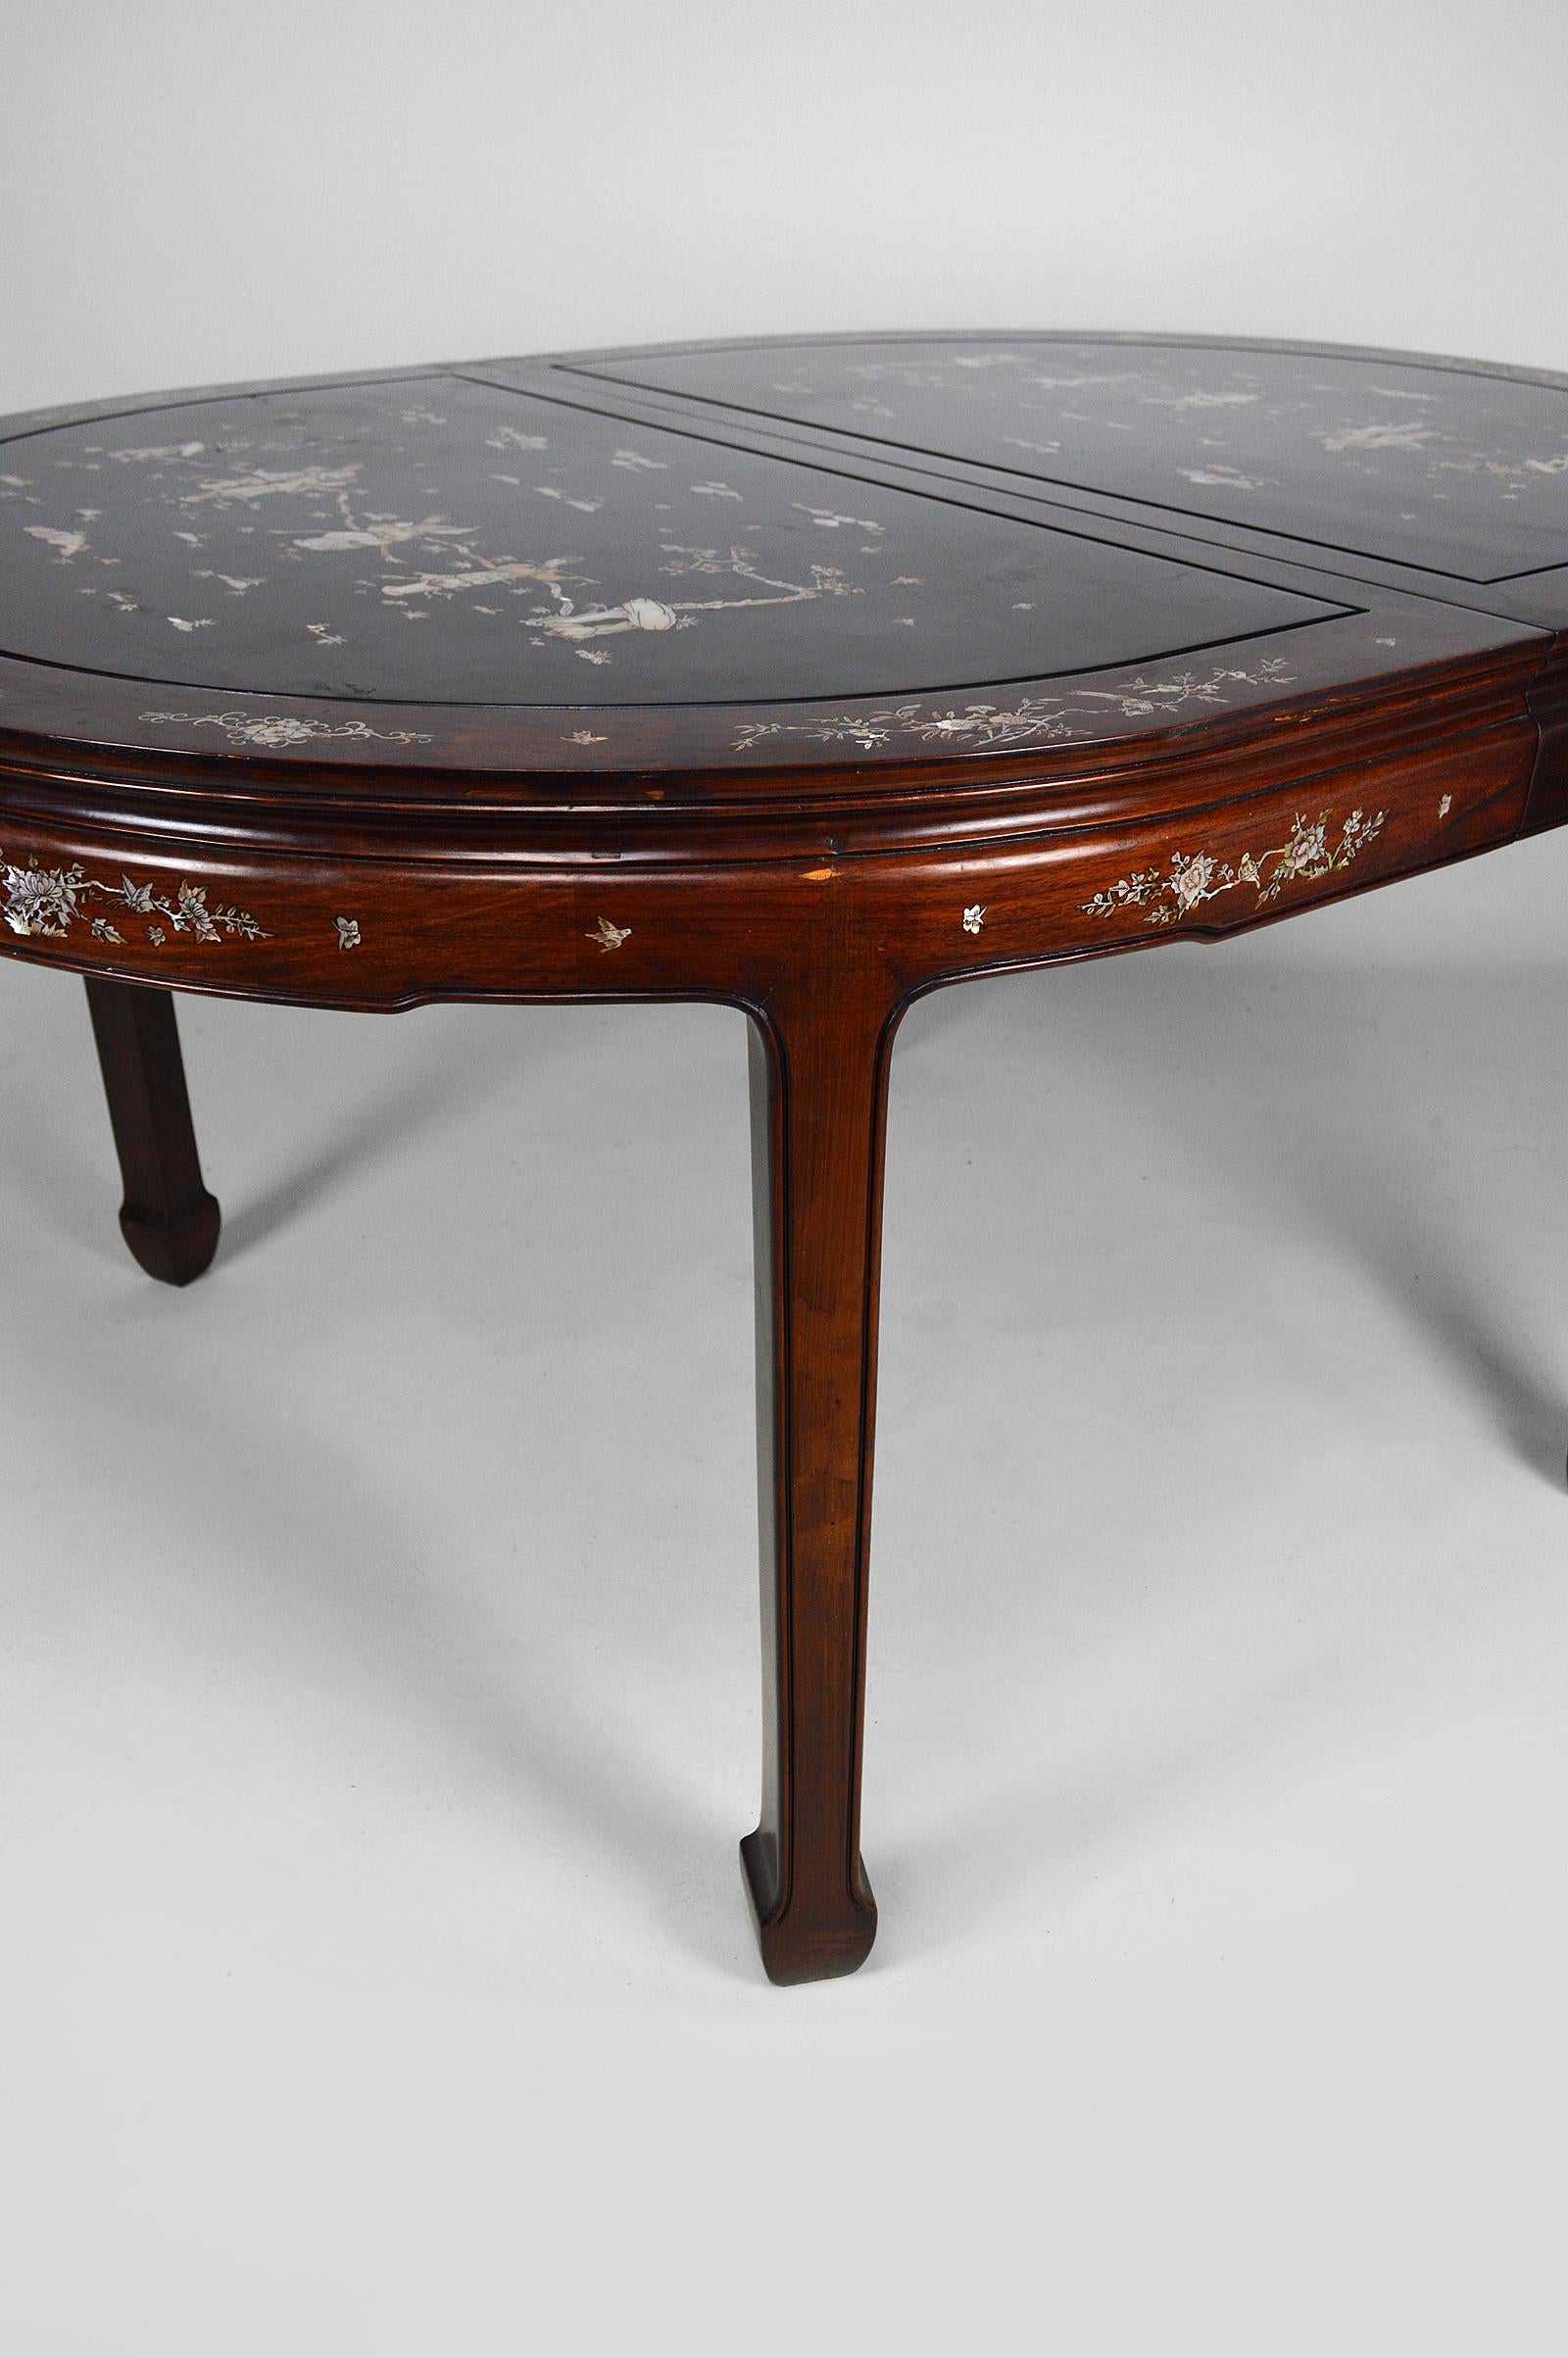 Asian Inlaid Wooden Dining Table with Extensions, Mid-20th Century 10